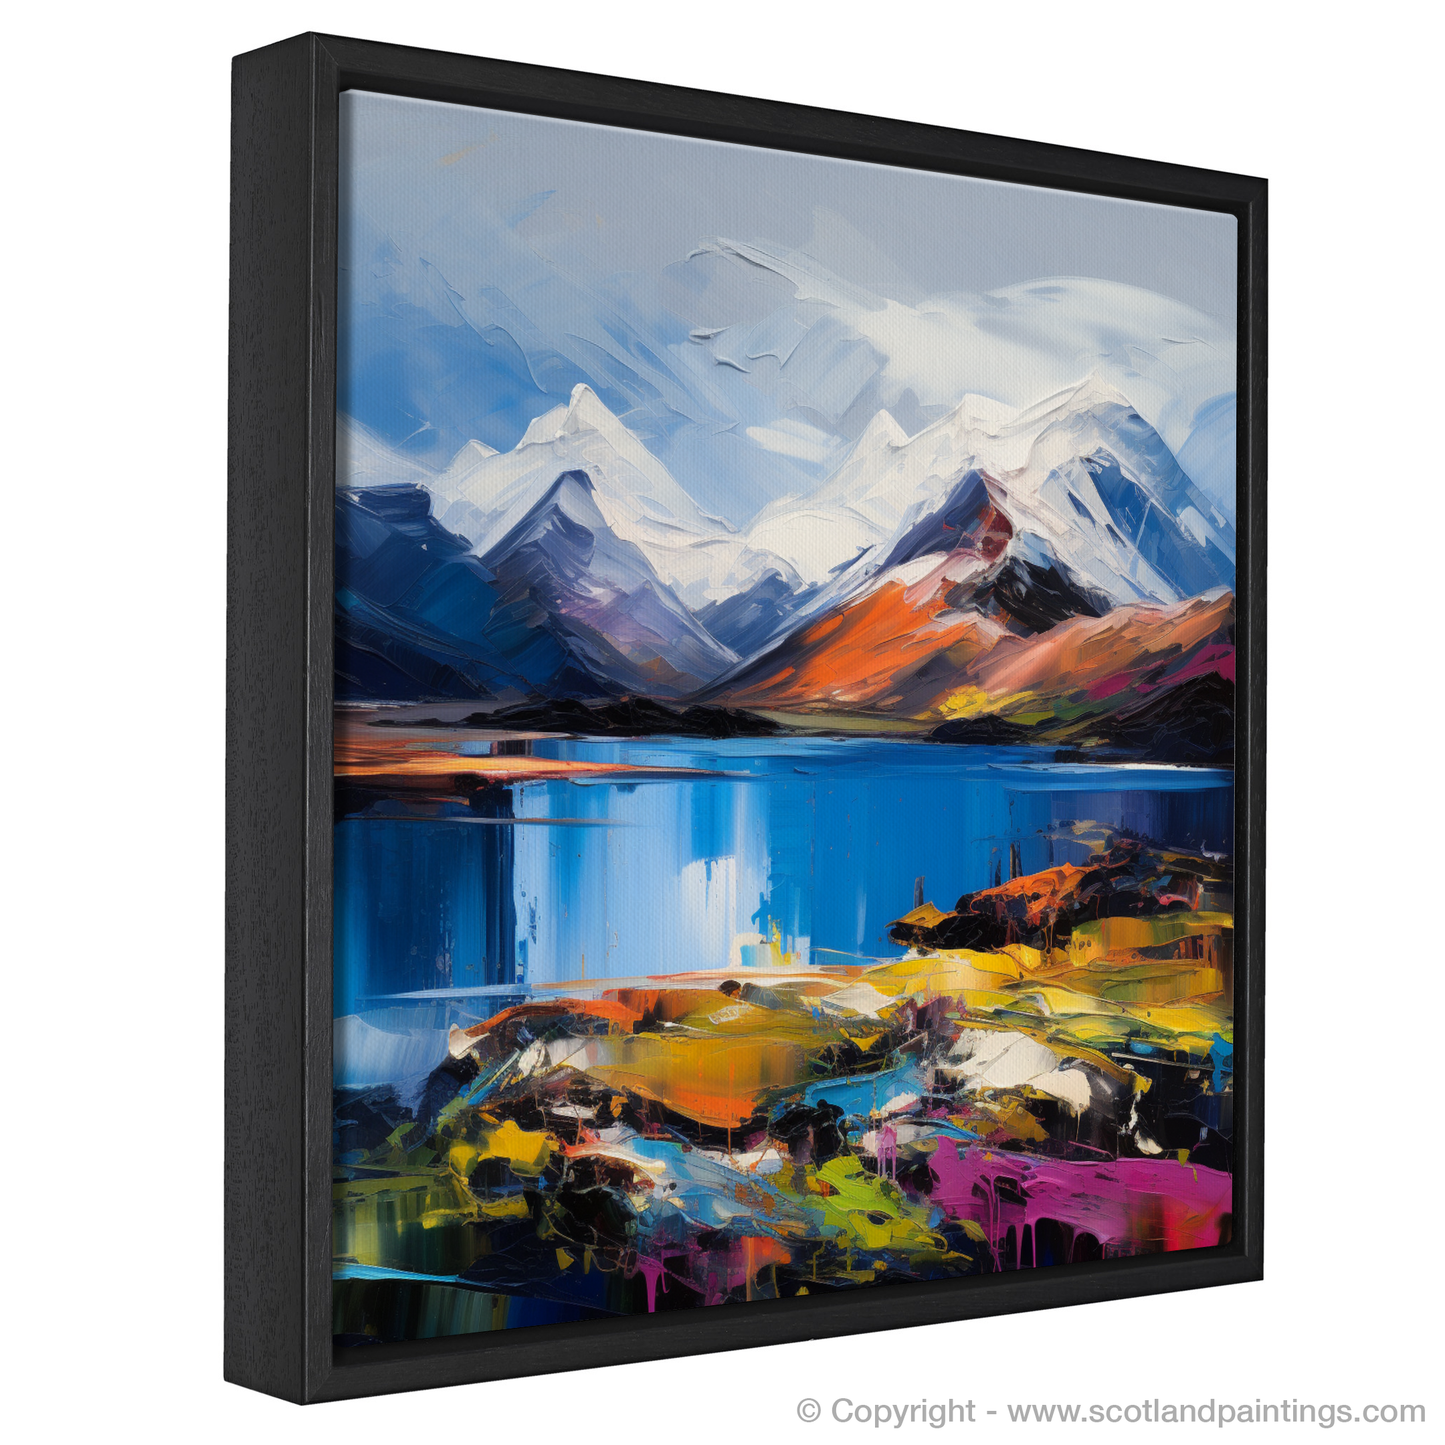 Painting and Art Print of Snow-capped peaks overlooking Loch Lomond entitled "Loch Lomond's Snowy Peaks: An Expressionist Ode to Scotland's Wild Beauty".